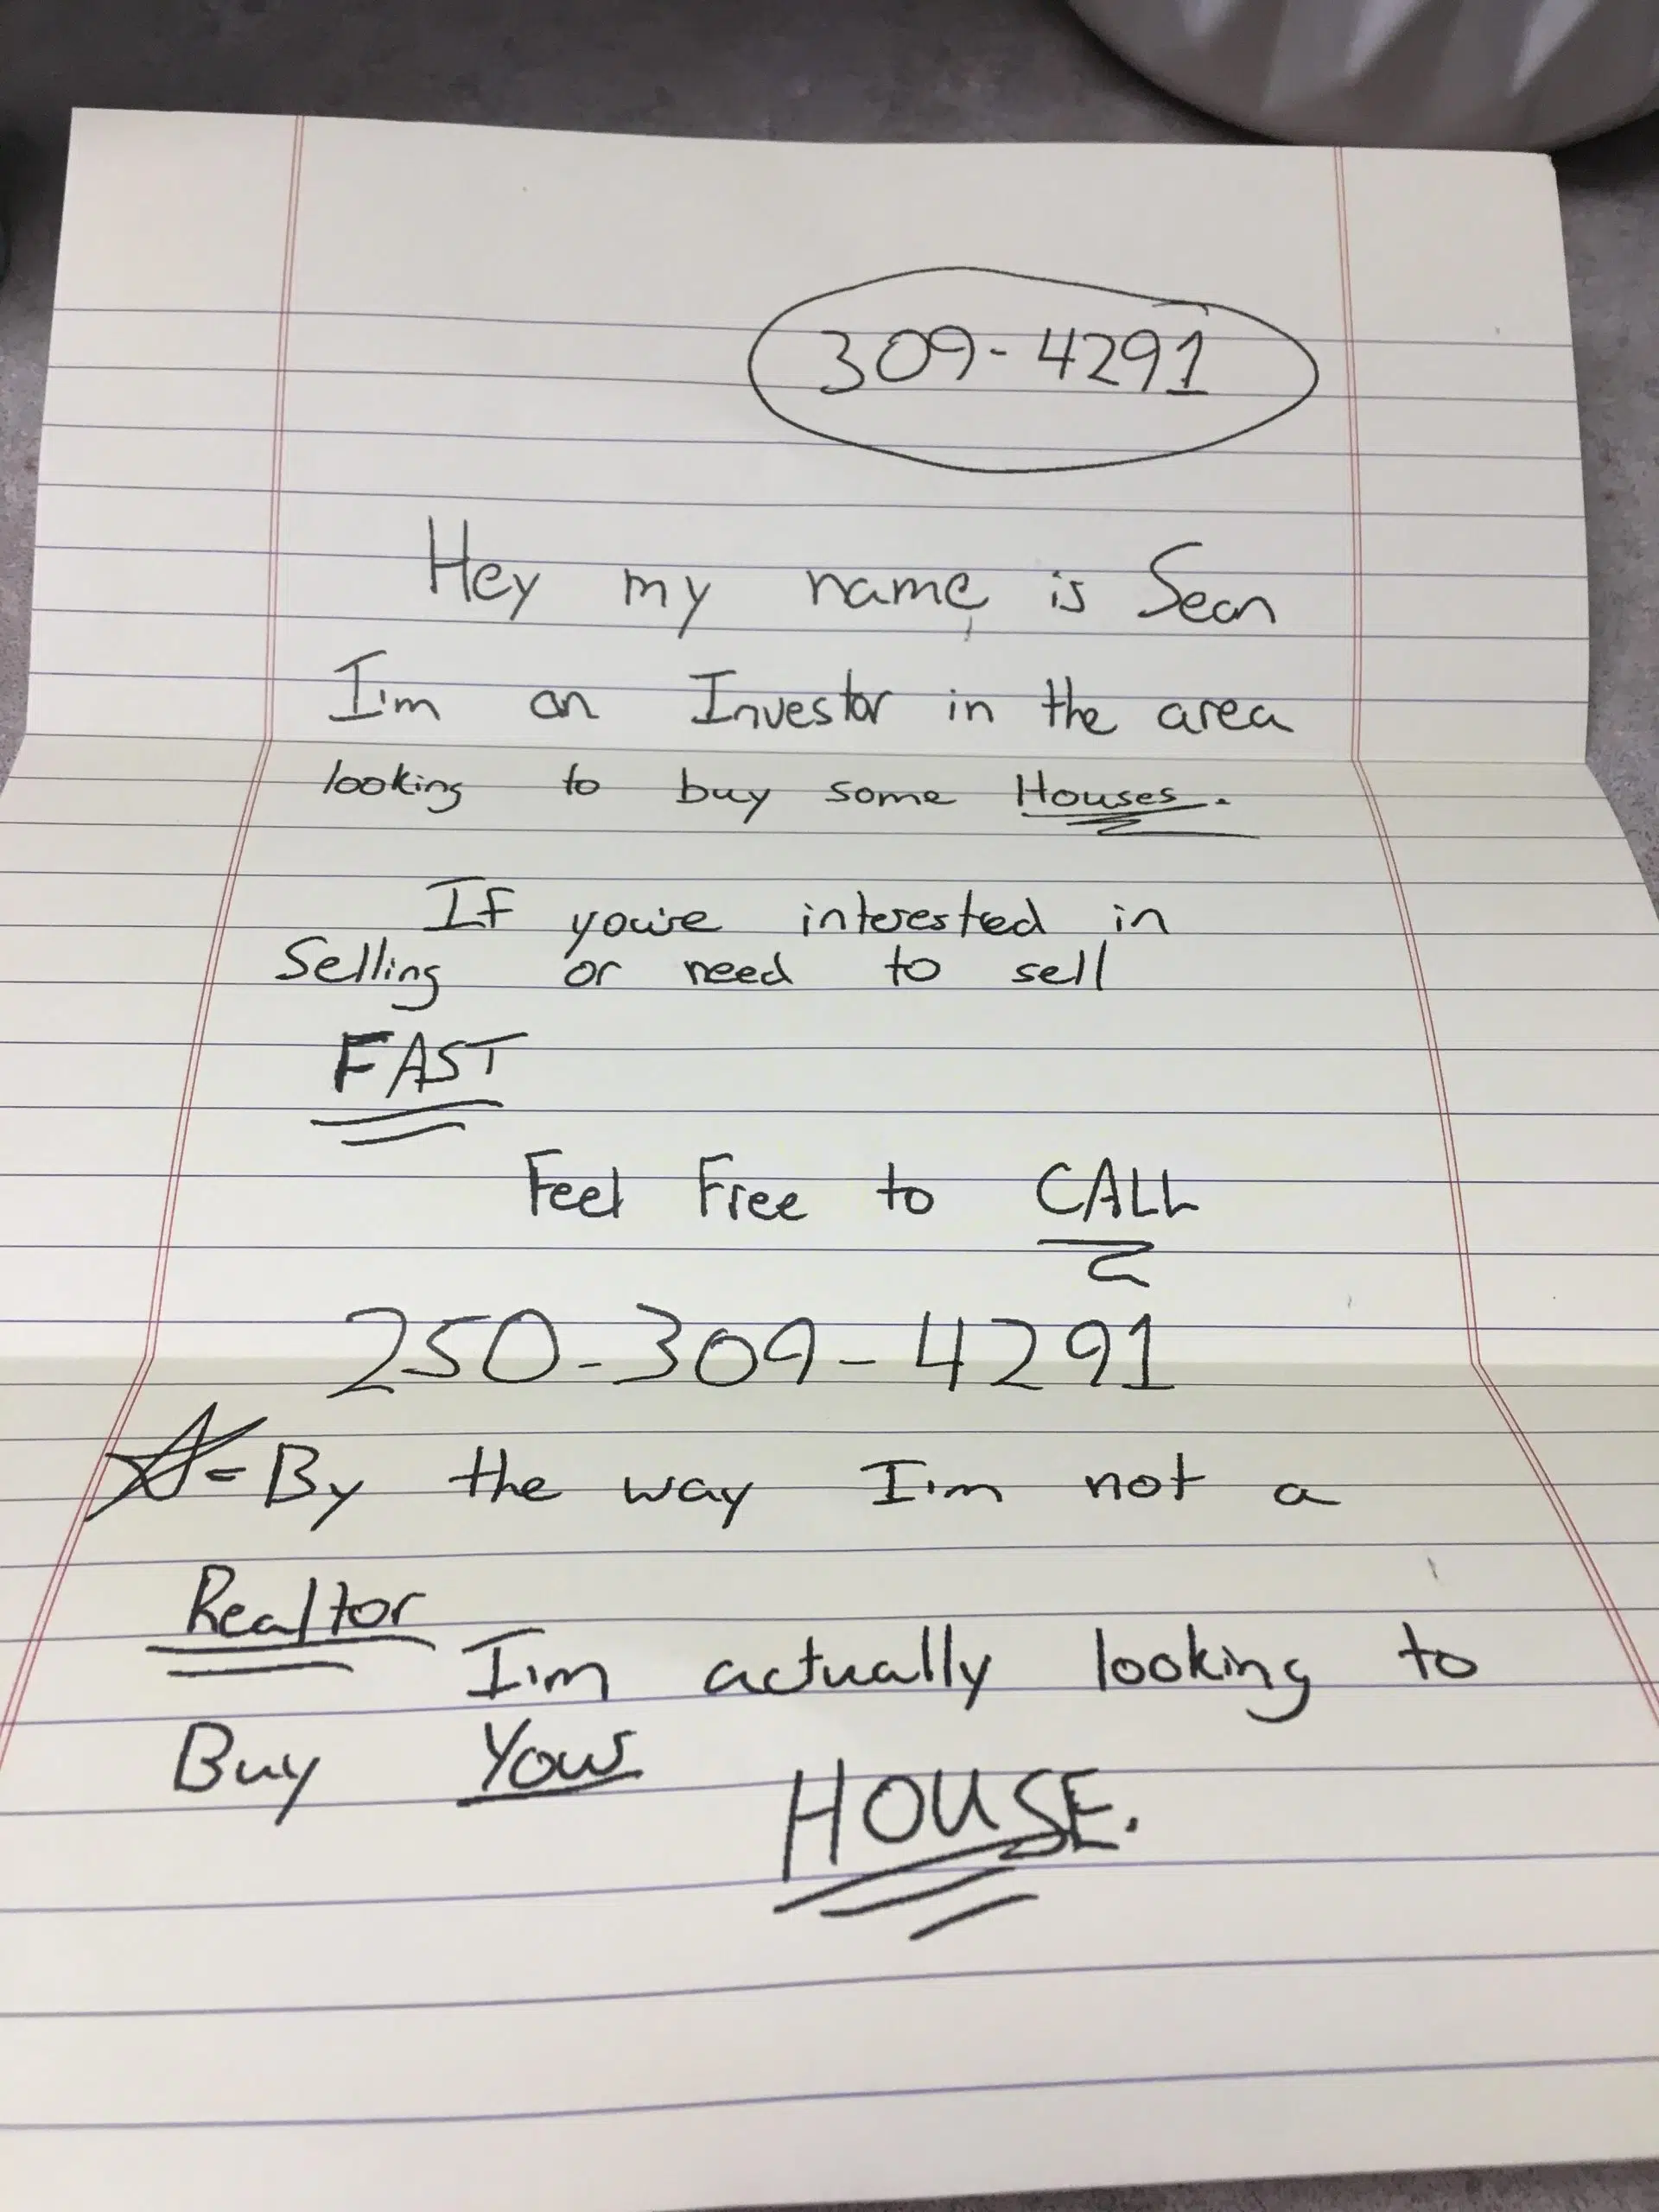 Hand-written letter sent to Kamloops homeowners not a scam